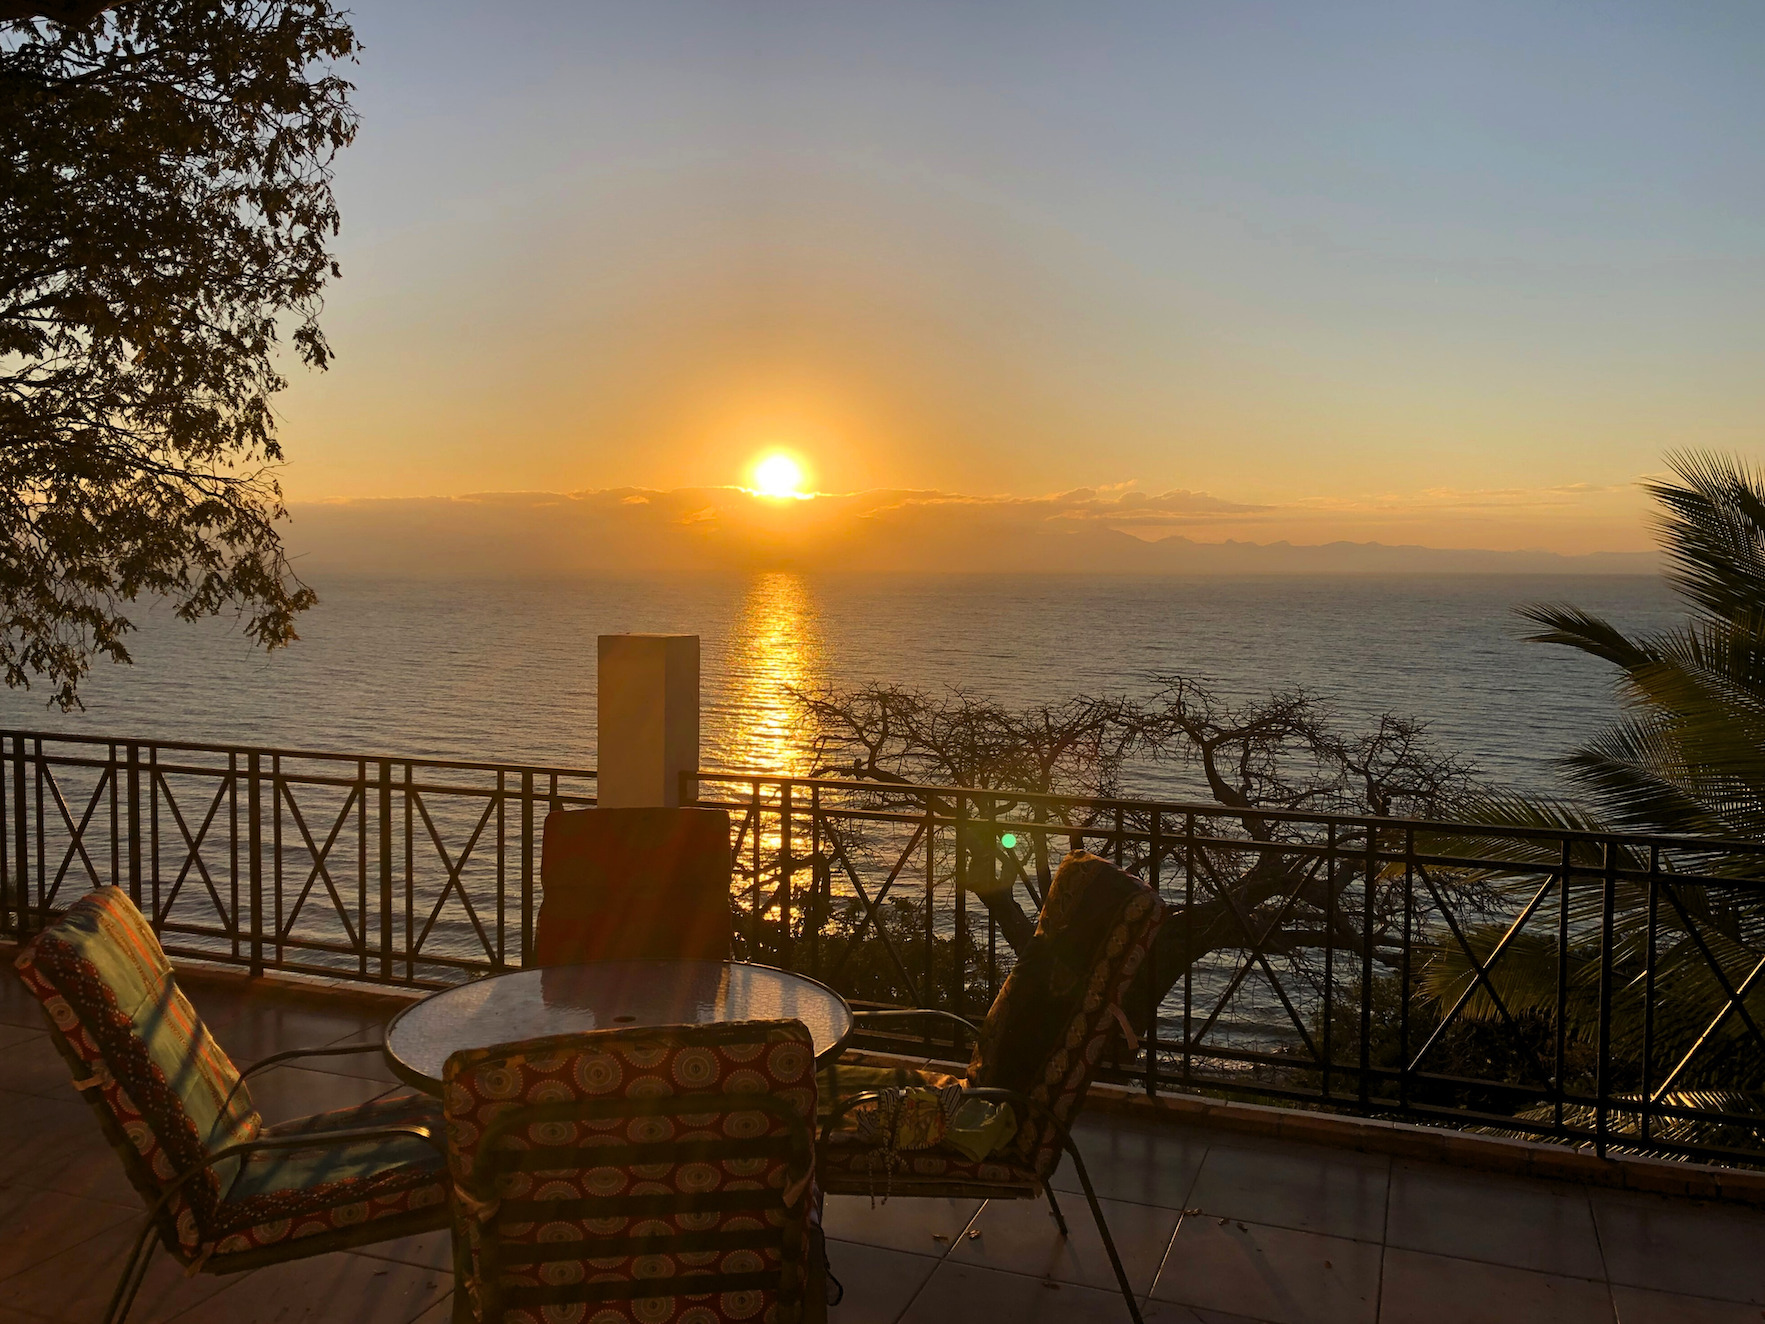 The sun setting on Lake Malawi in front of a patio